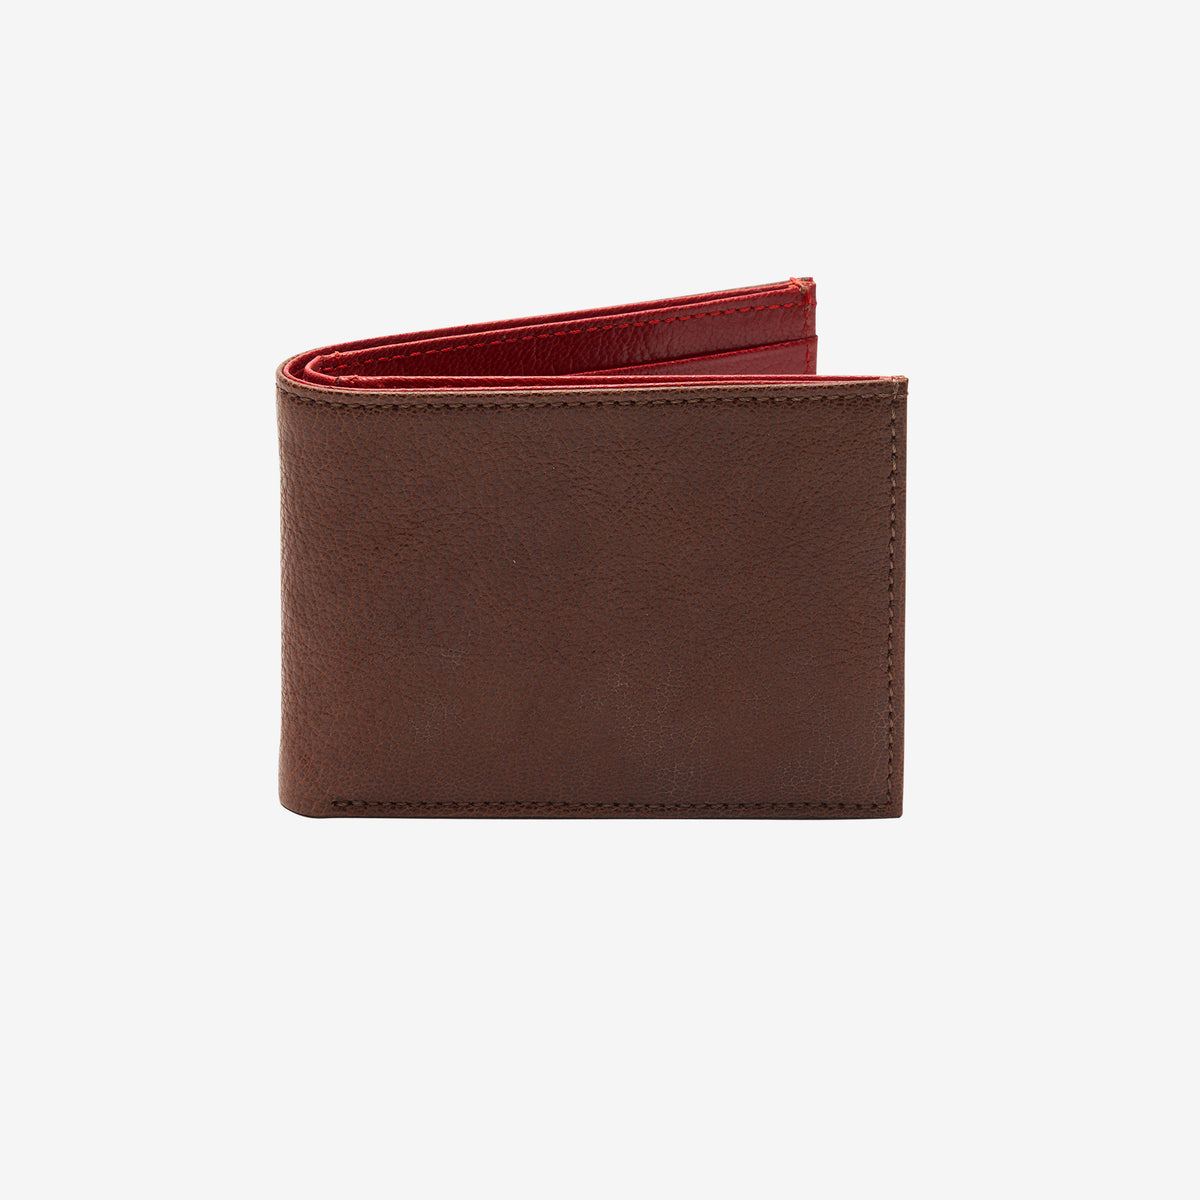    tusk-122-mens-compact-billfold-wallet-chocolate-and-red-front